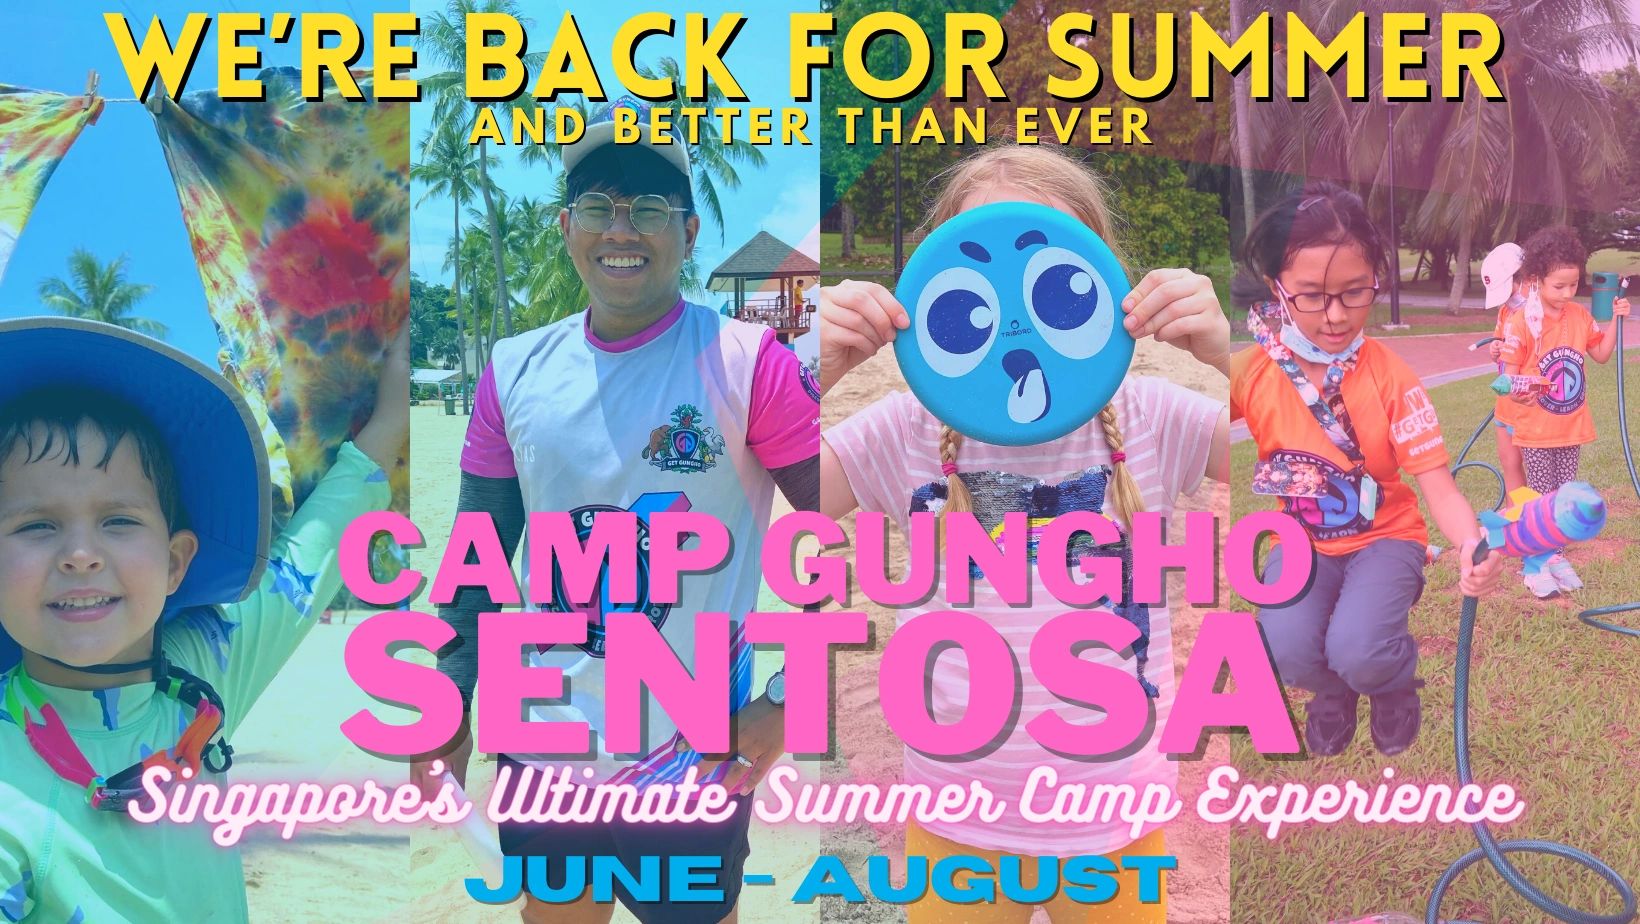 Spring may be over but the Fun of Summer is just about to start at Camp GungHo Sentosa